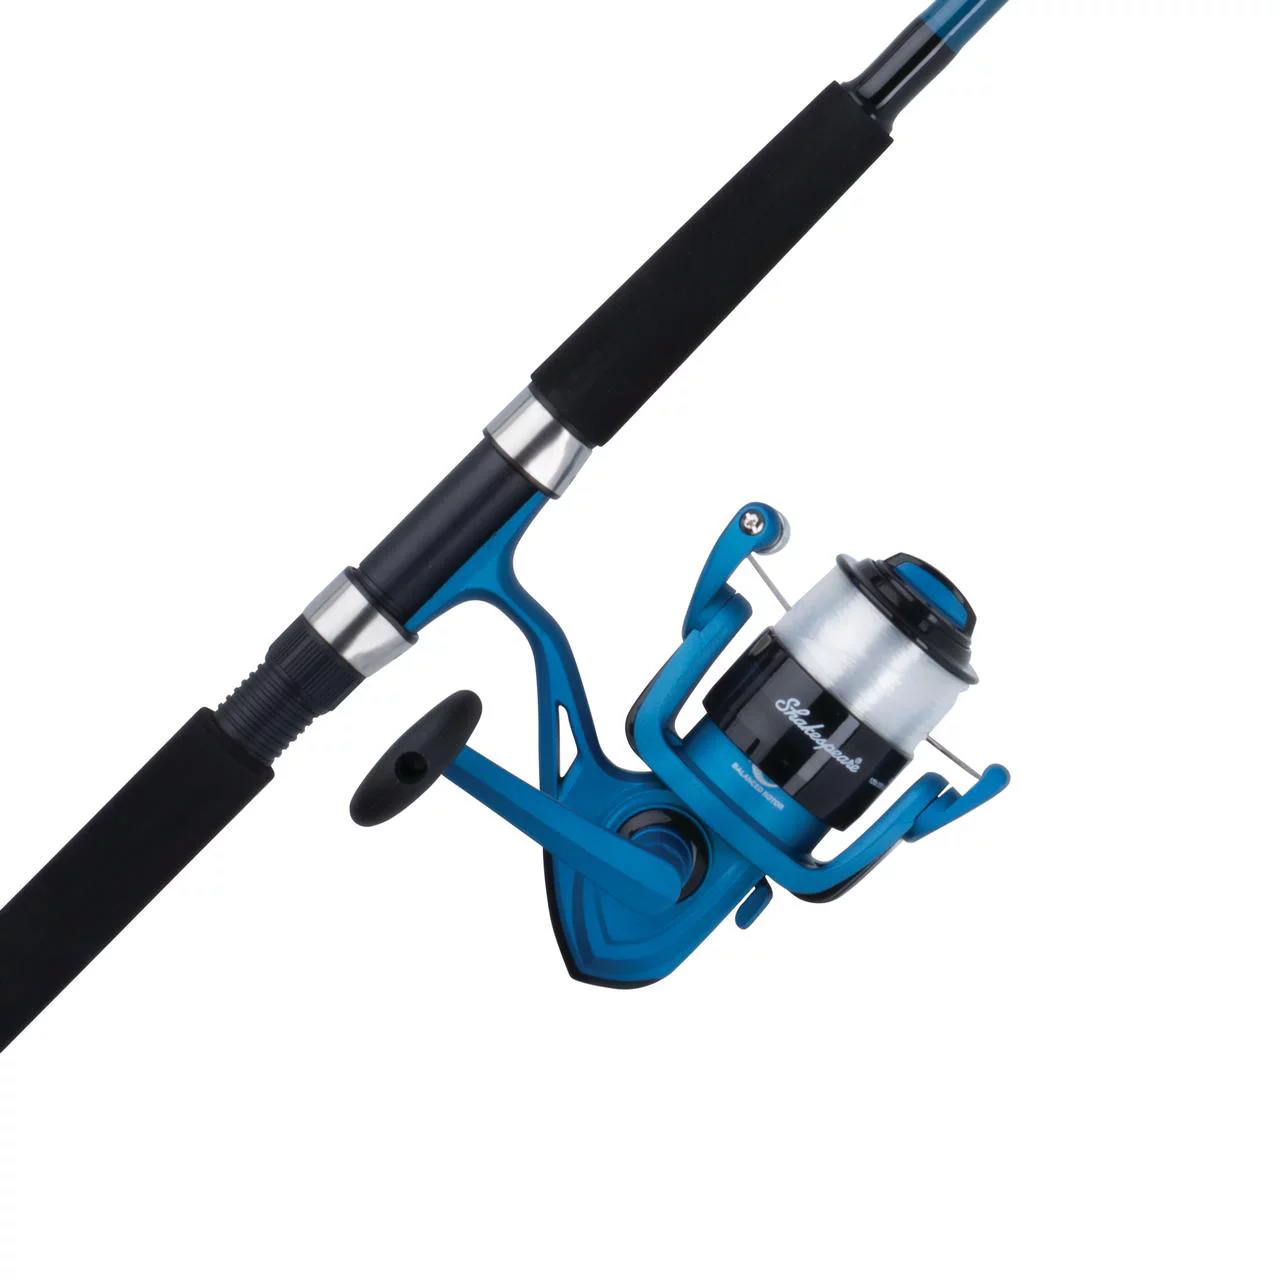 Shakespeare Tiger 7' Spinning Rod and Reel Combo 